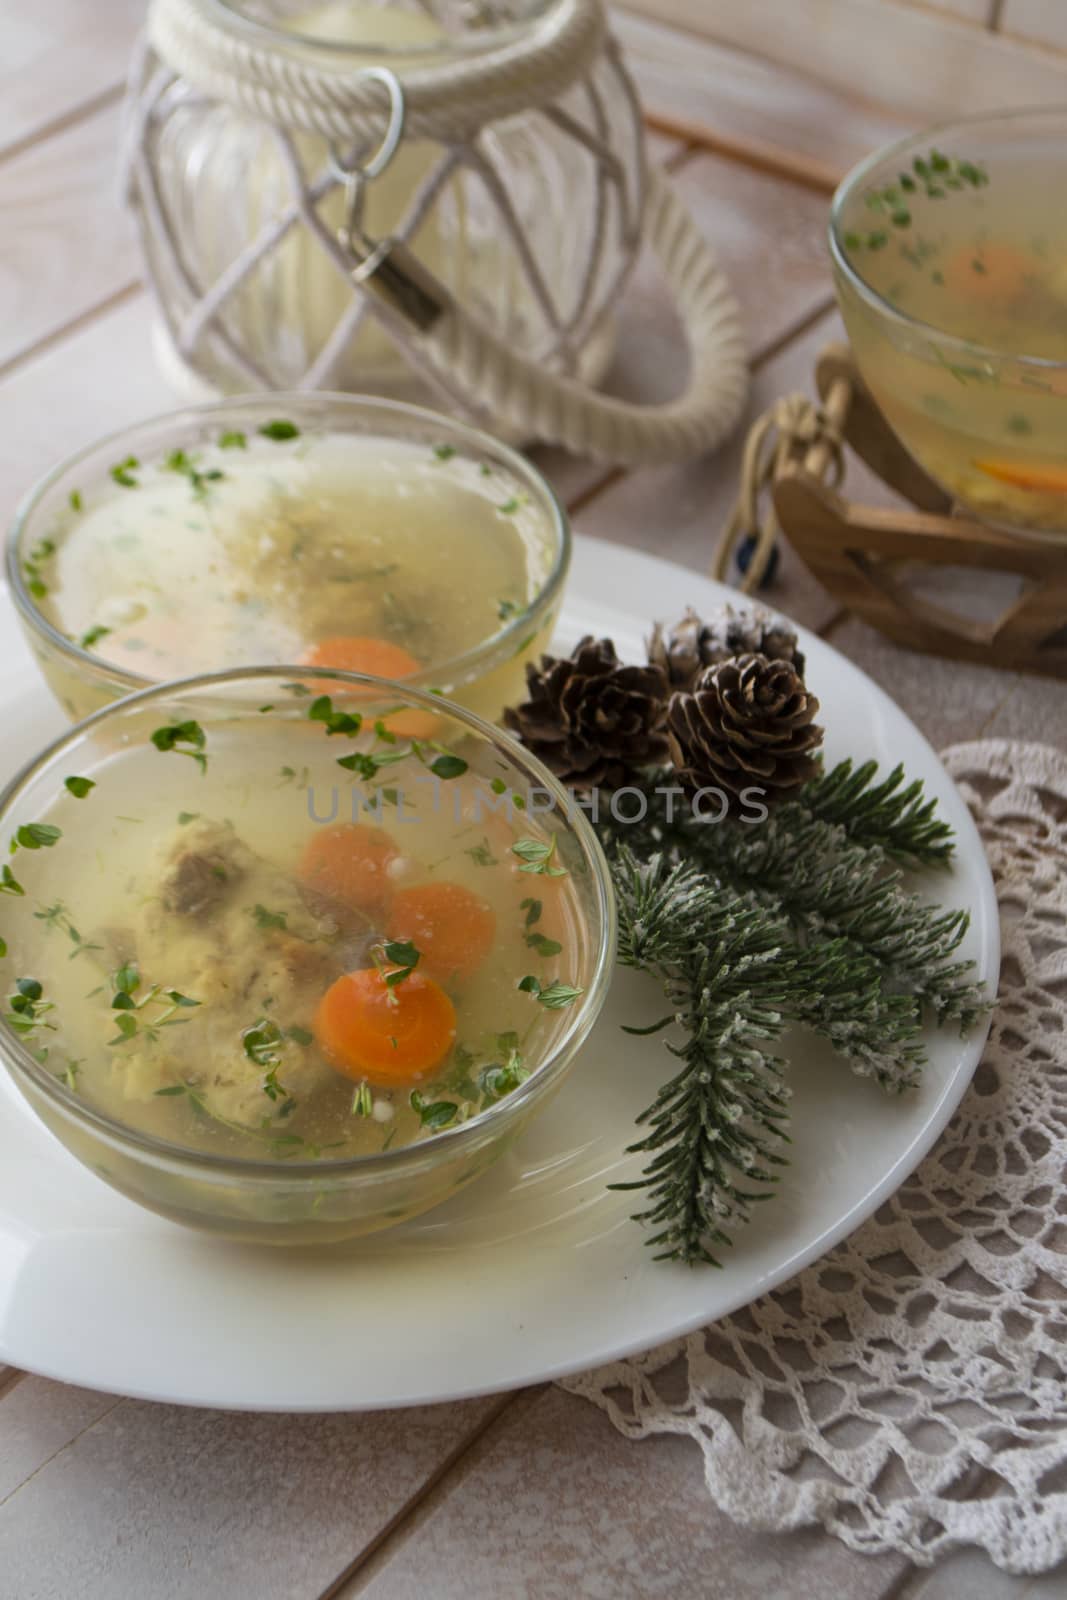 Jellied fish with egg and vegetables on an shabby background by annaolgabymonaco